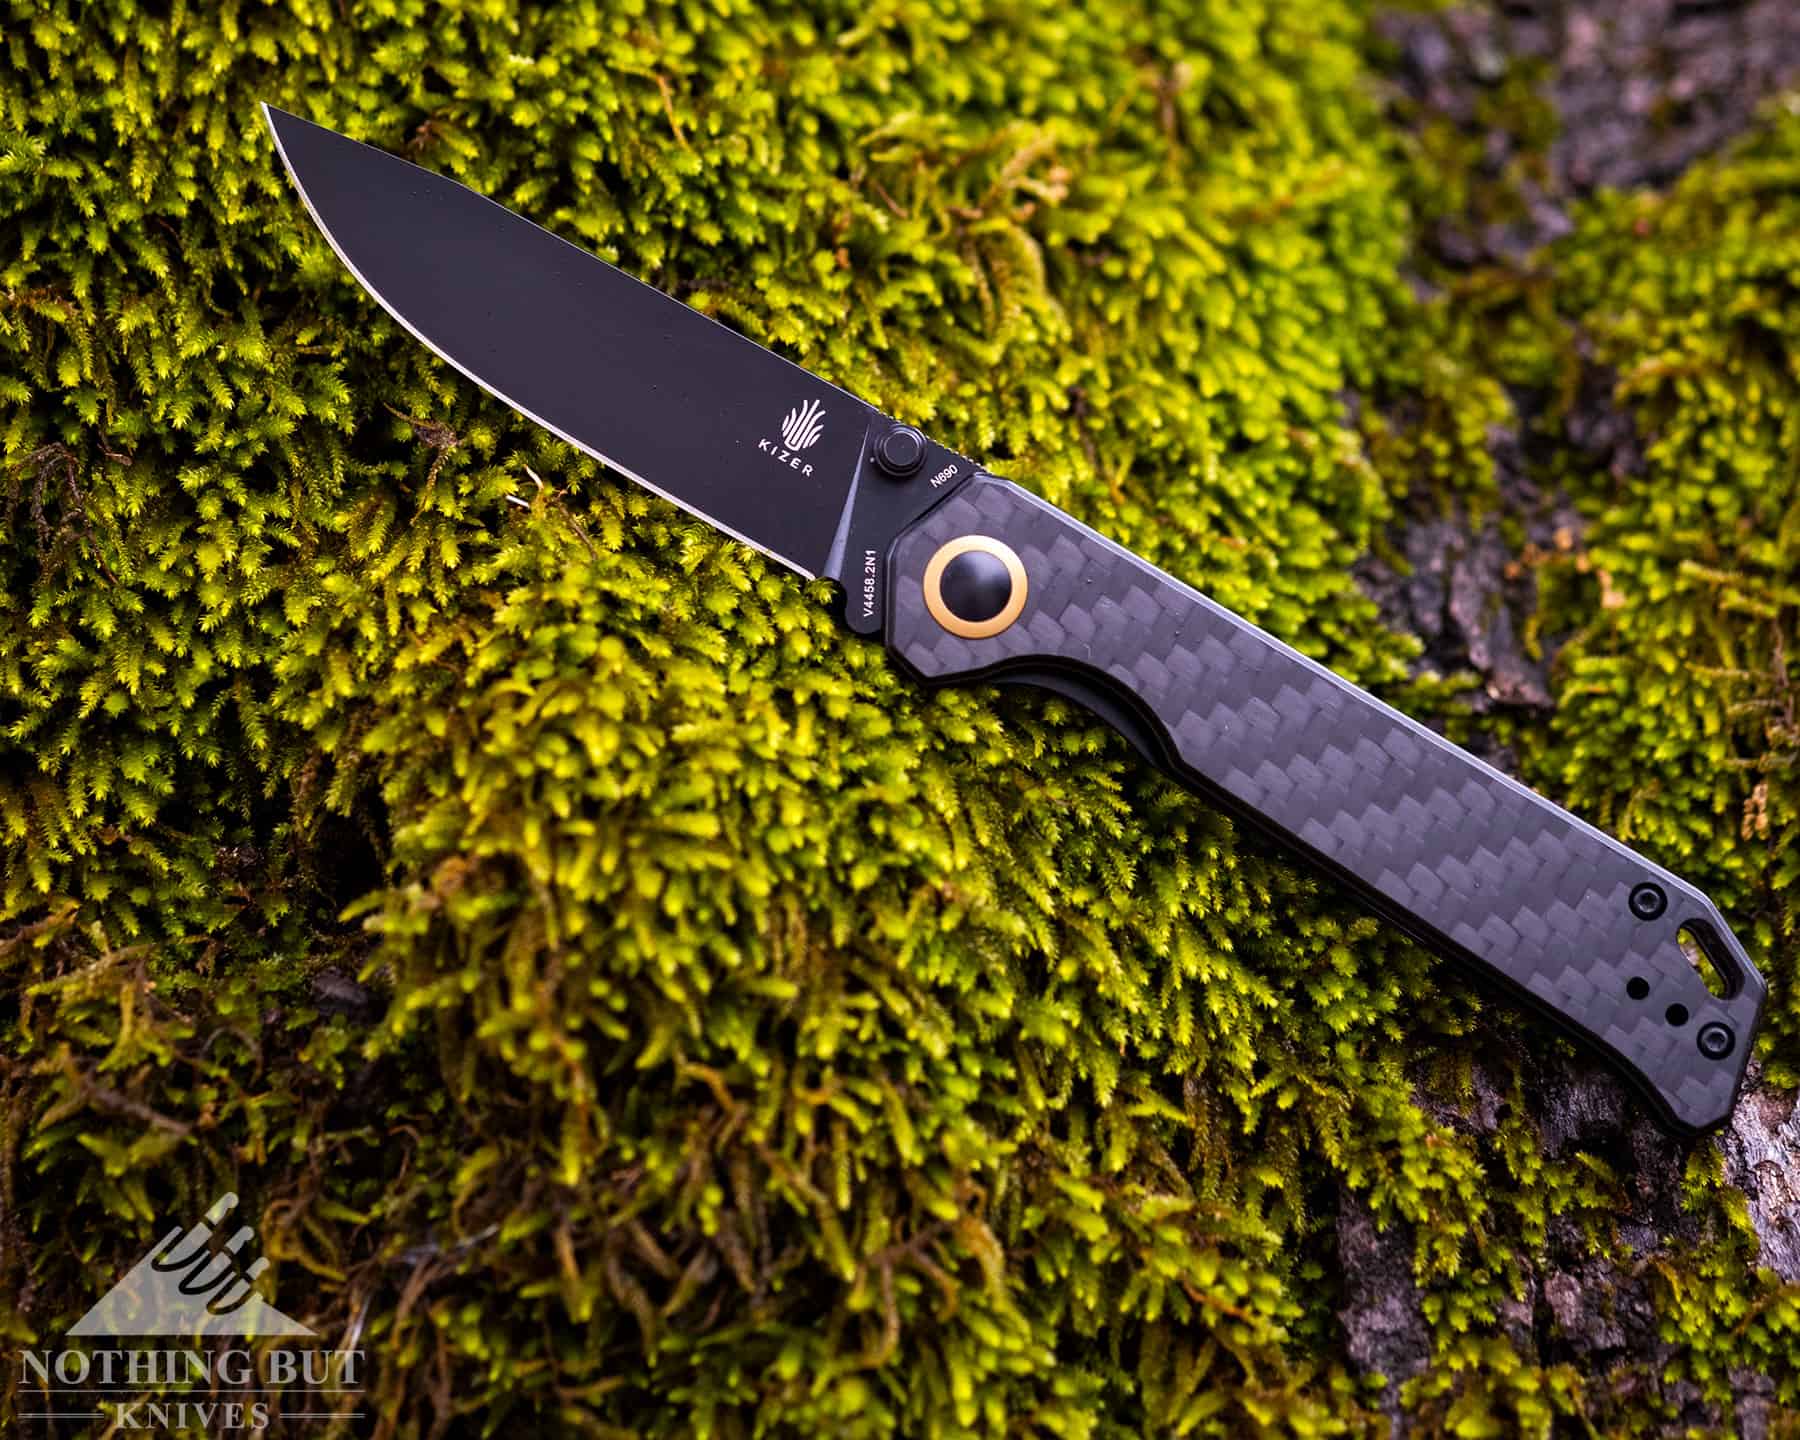 The upgraded Kizer Begleiter 2 pocket knife in the open position to show the improvements.